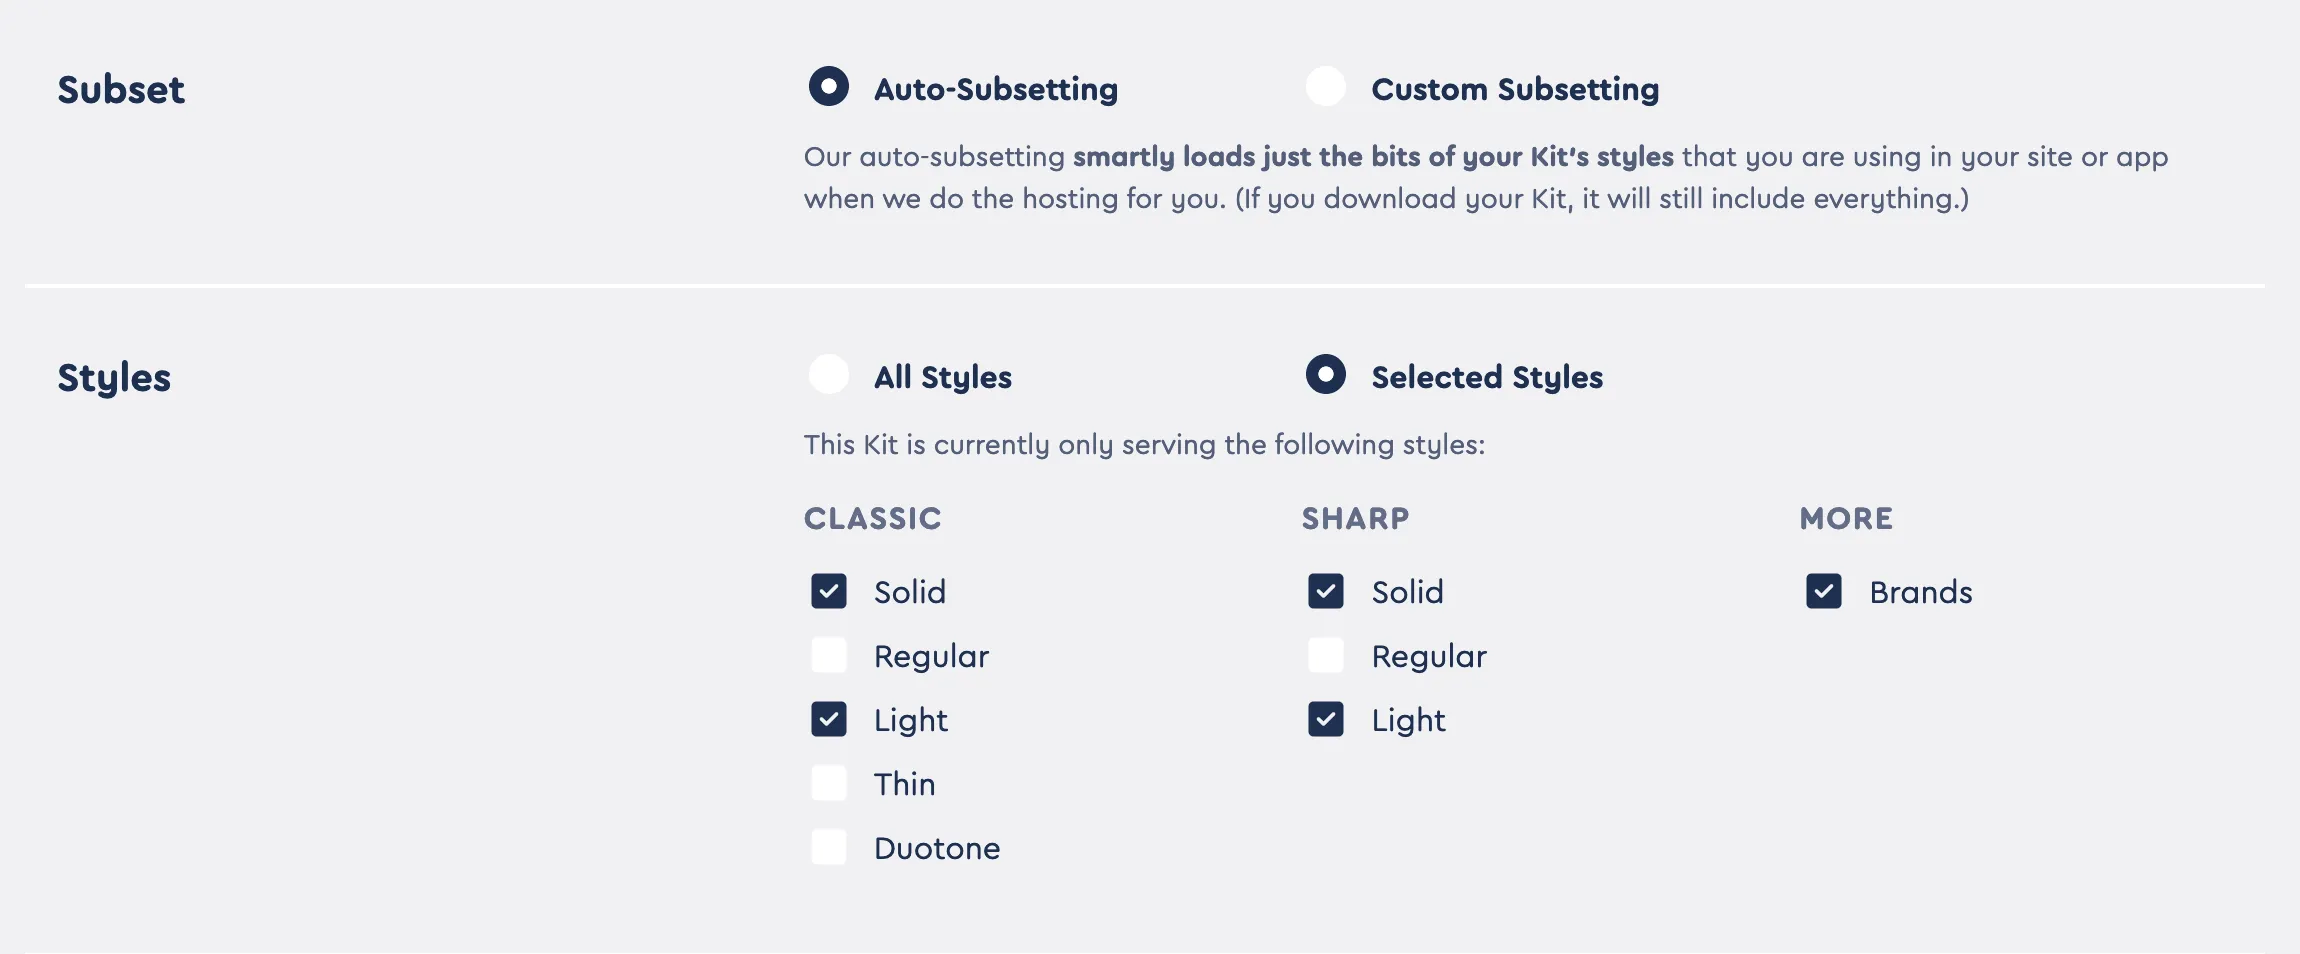 Subsetting by Style in Settings